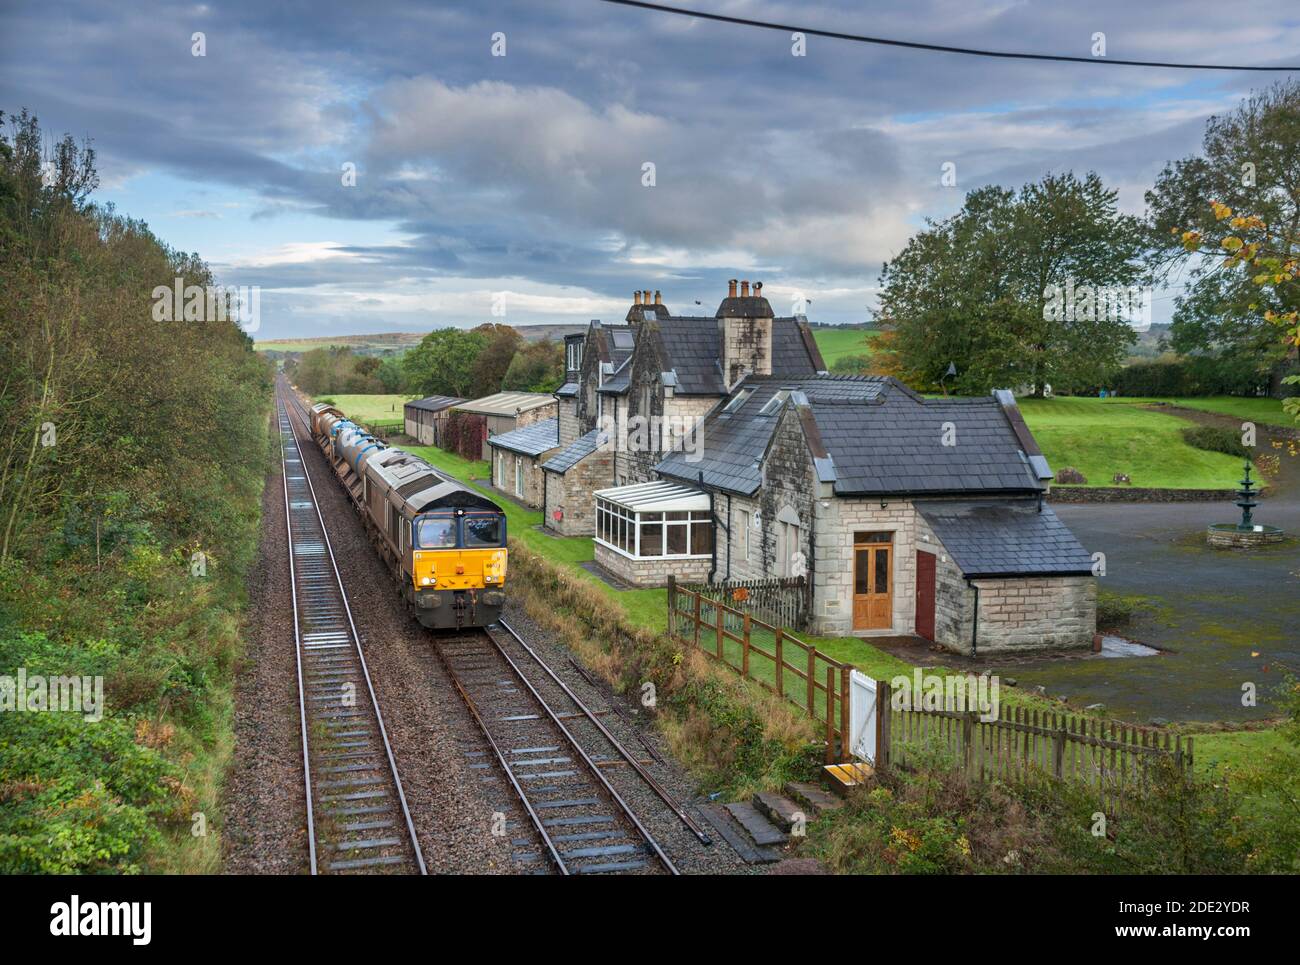 Direct Rail Services class 66 locomotive hauling  Network Rail Railhead treatment train dealing with autumn leaves passing the closed Arkholme station Stock Photo